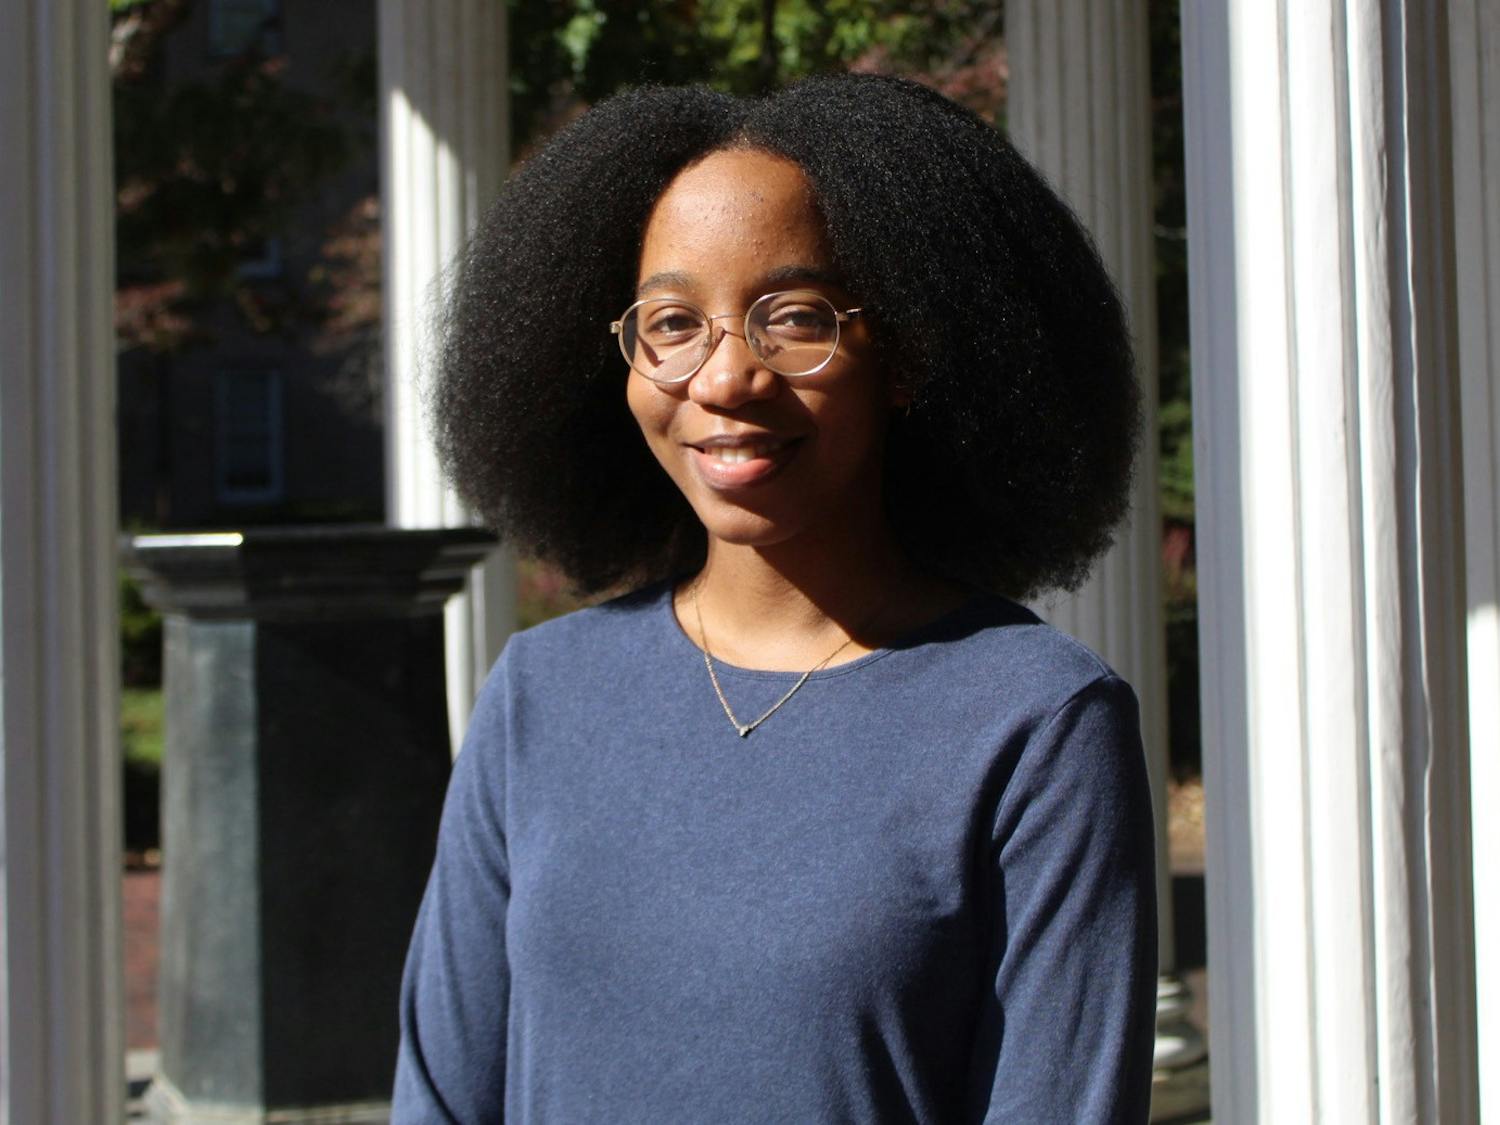 Senior health policy and management major Takhona Hlatshwako has been named UNC’s 52nd Rhodes Scholar, allowing her a fully-funded one-year interdisciplinary master’s degree program in international health and tropical medicine at Oxford University.